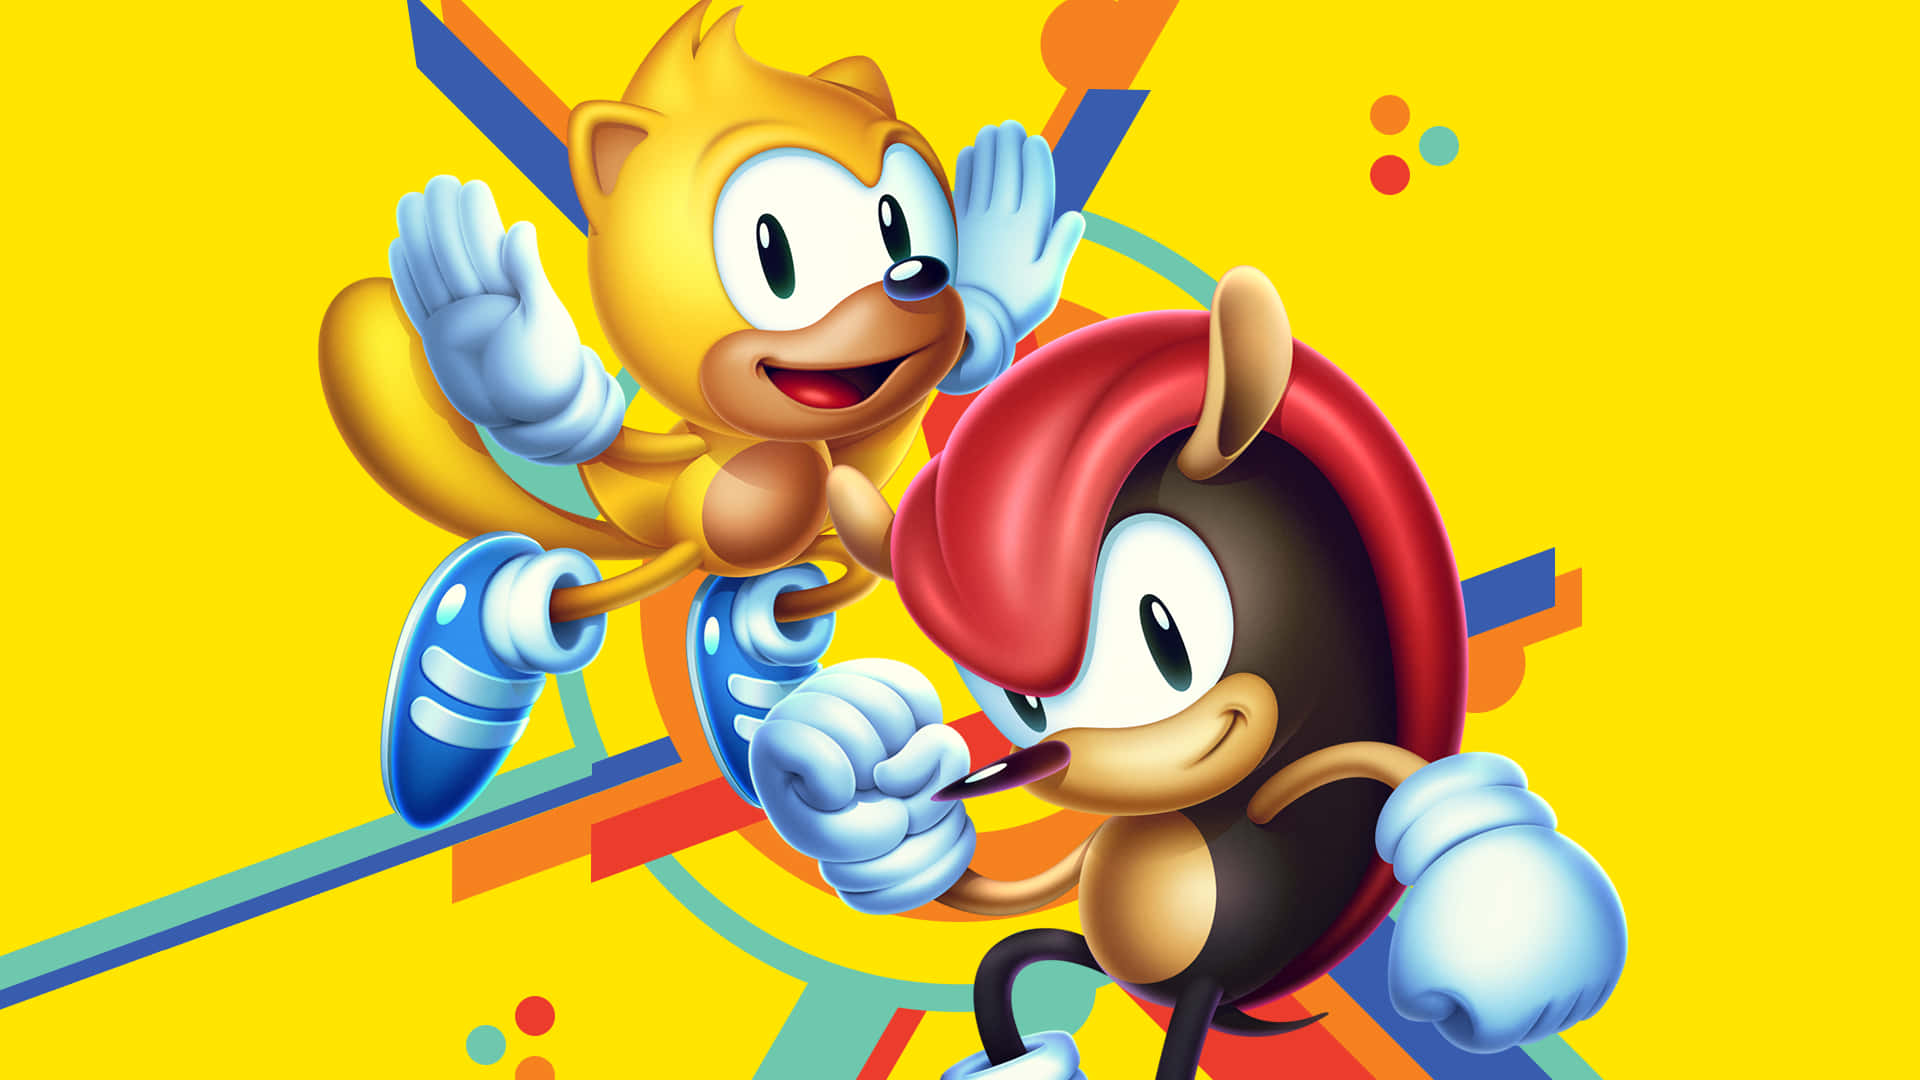 Mighty The Armadillo Strikes a Pose in High Definition Wallpaper